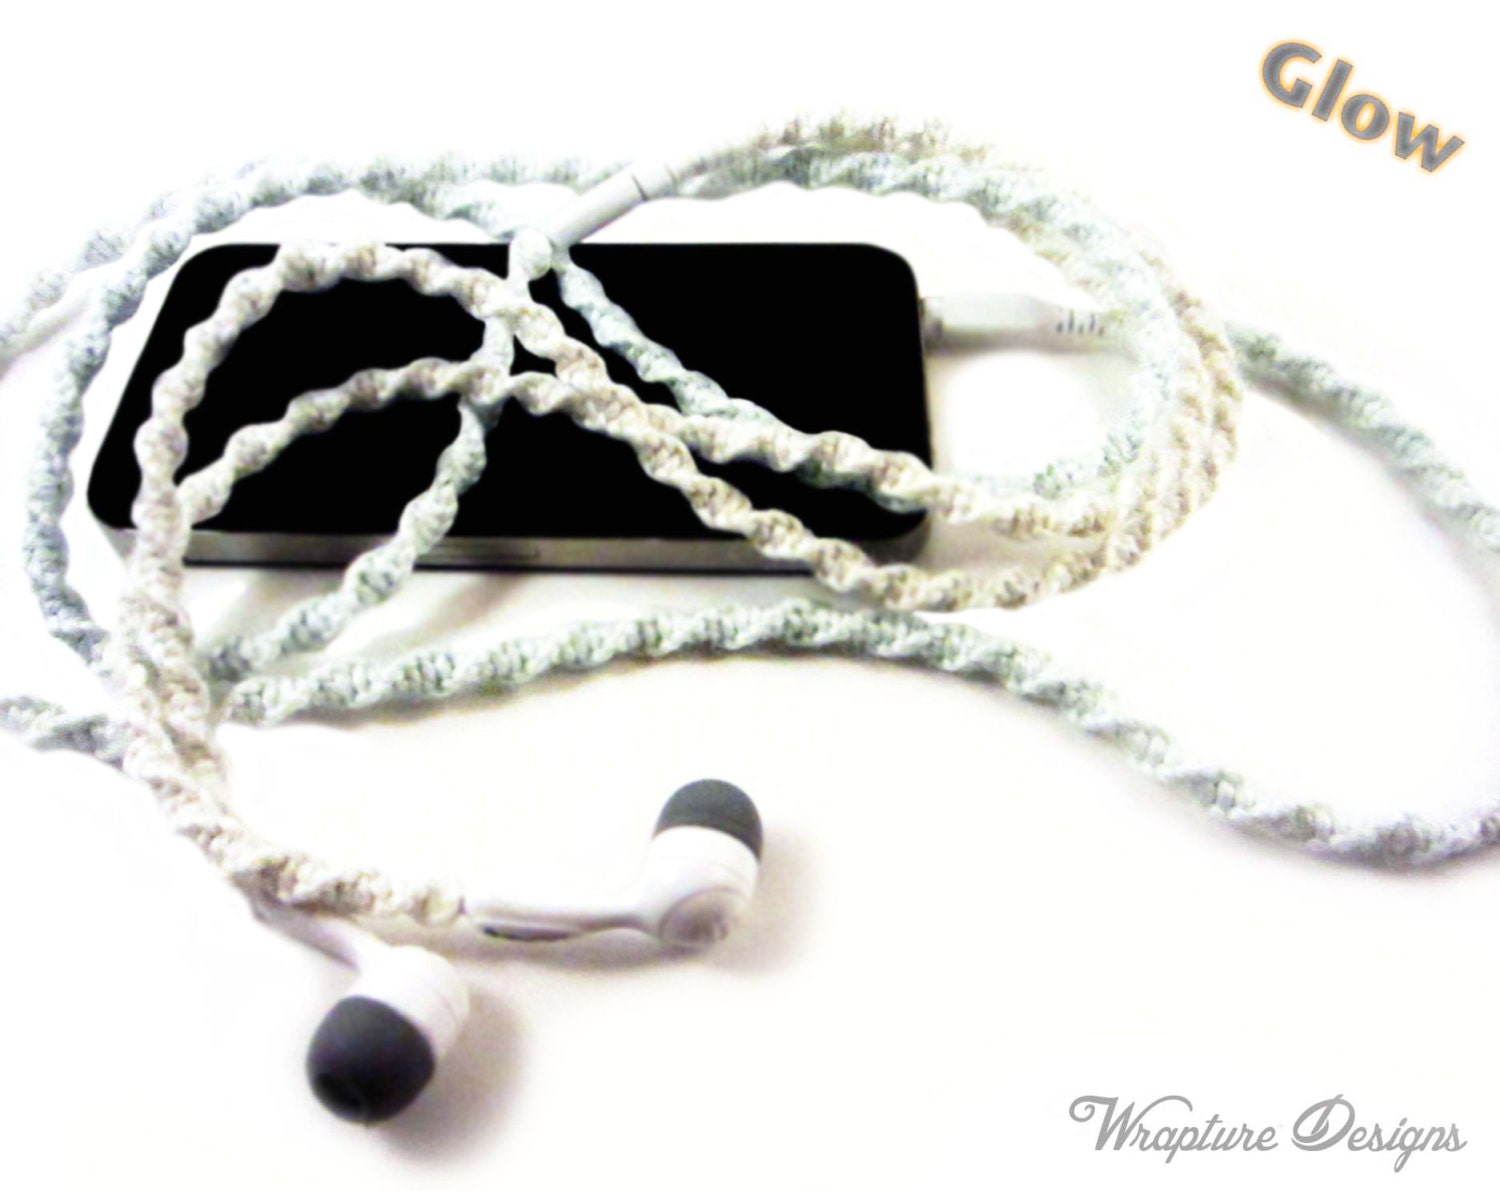 GLOW in the DARK Wrapped Tangle Free Earbuds - 'G.L.O.W.' By Wrapture Designs